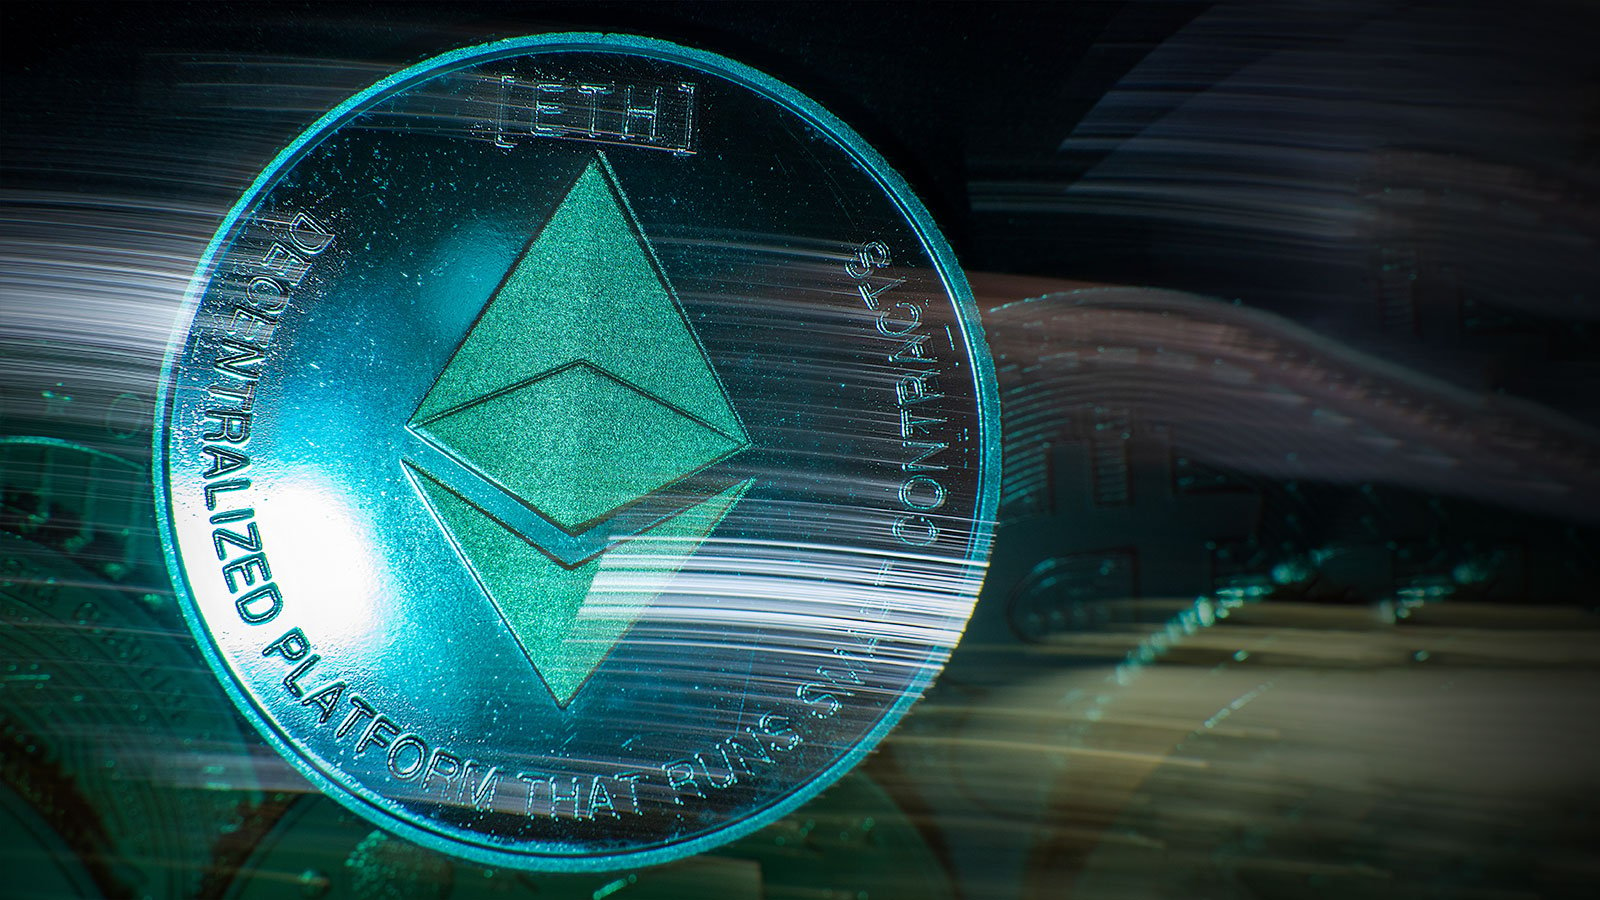 Ethereum Co-founder Comes Back with New Project to Democratize Crypto